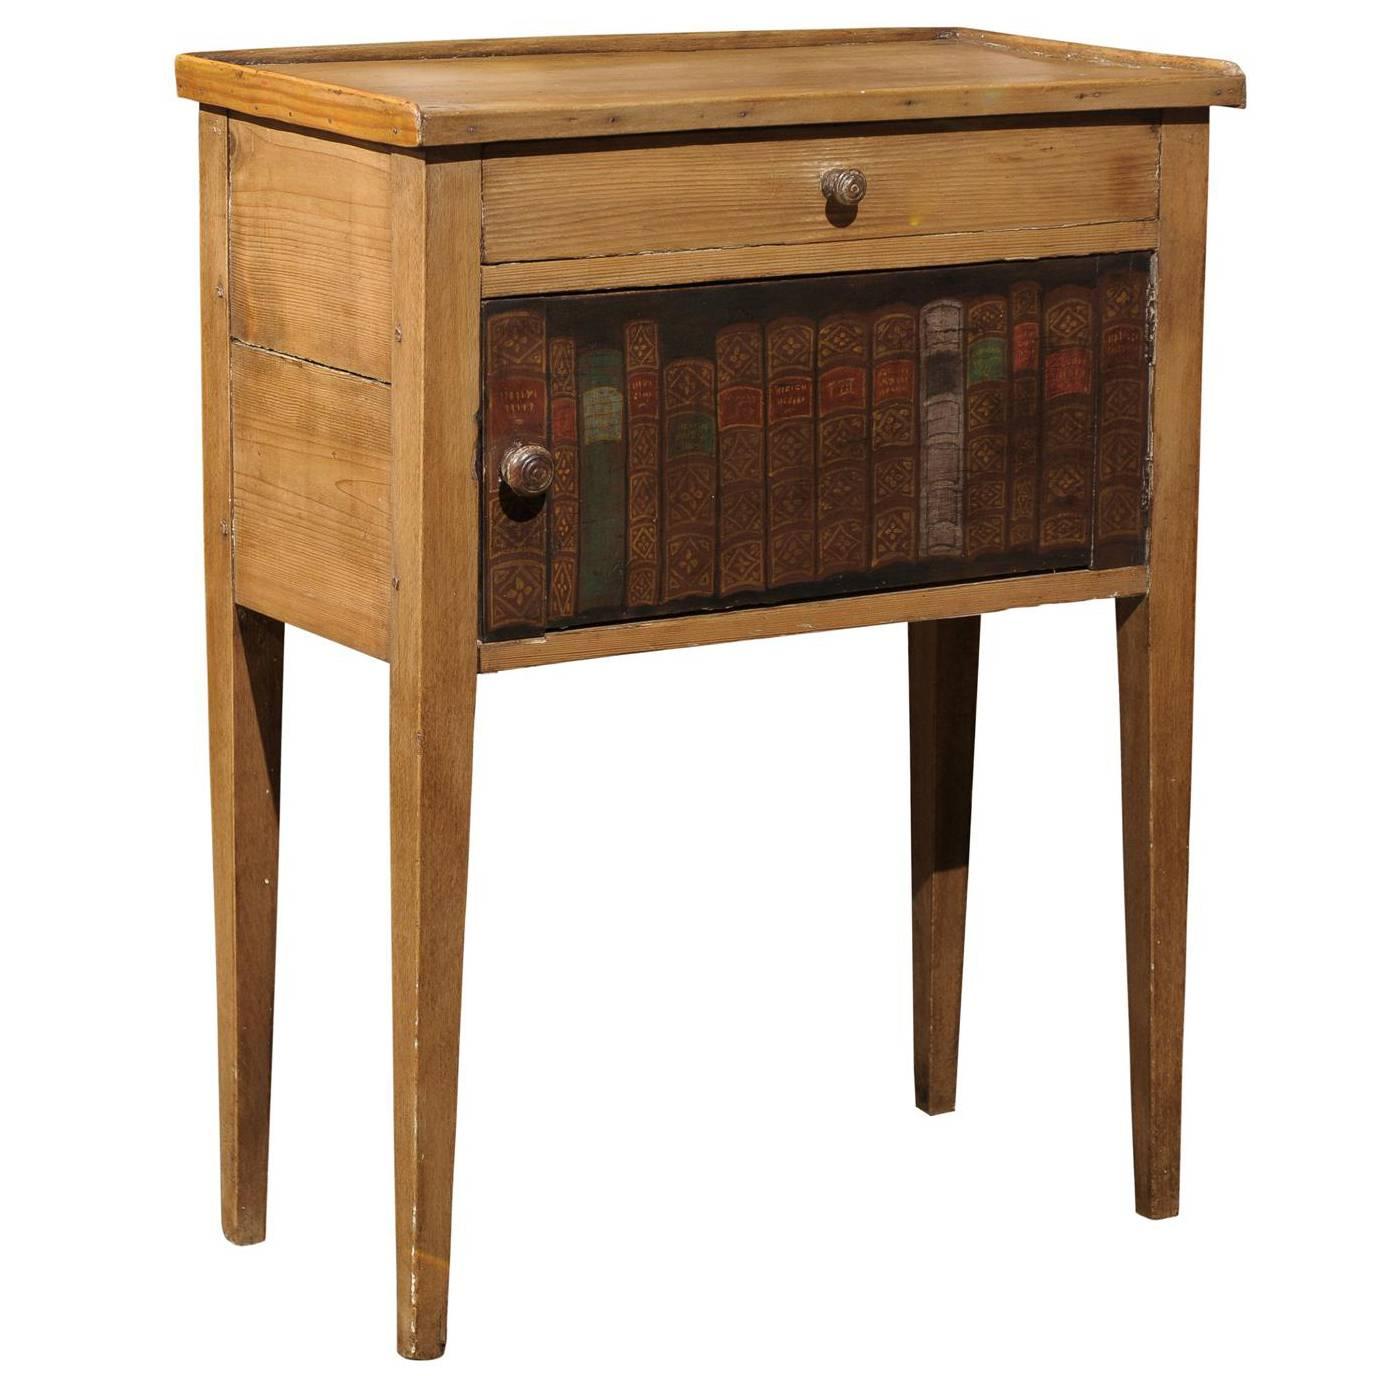 English Pine Side Table with Drawer and Faux Book Door from the 19th Century